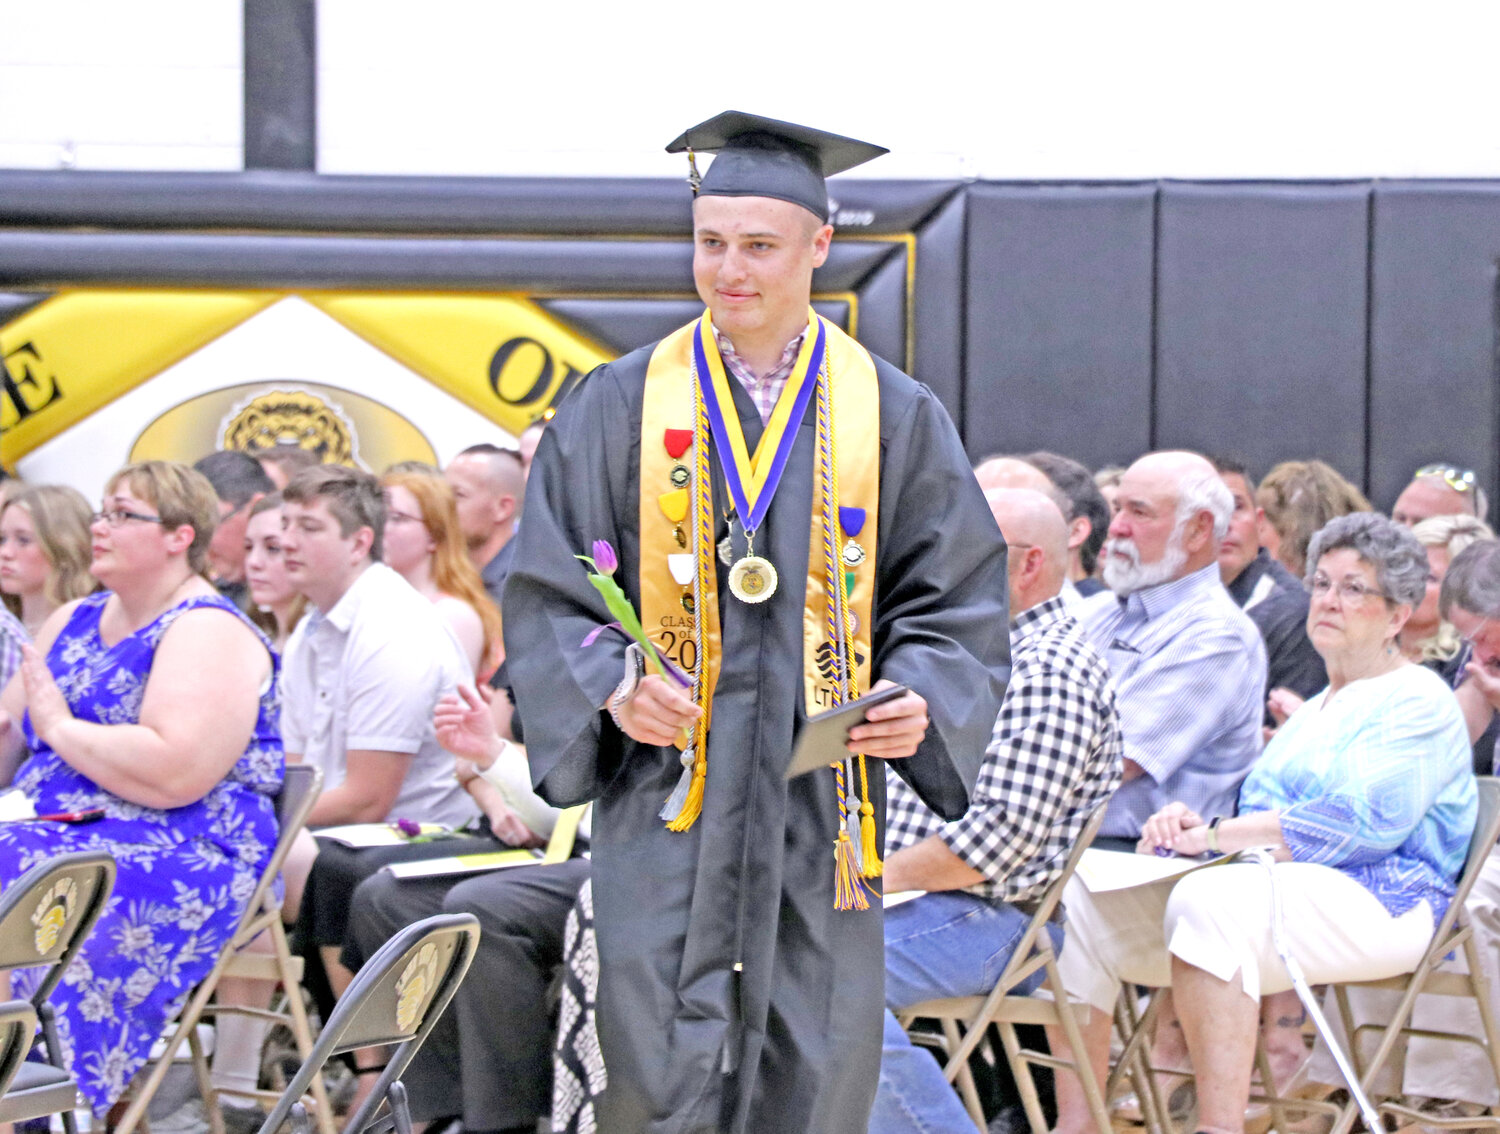 Lone Tree graduate Braden Viers looks for his family after walking the stage and receiving his diploma from his father, Gordon Viers, a member of the school board.